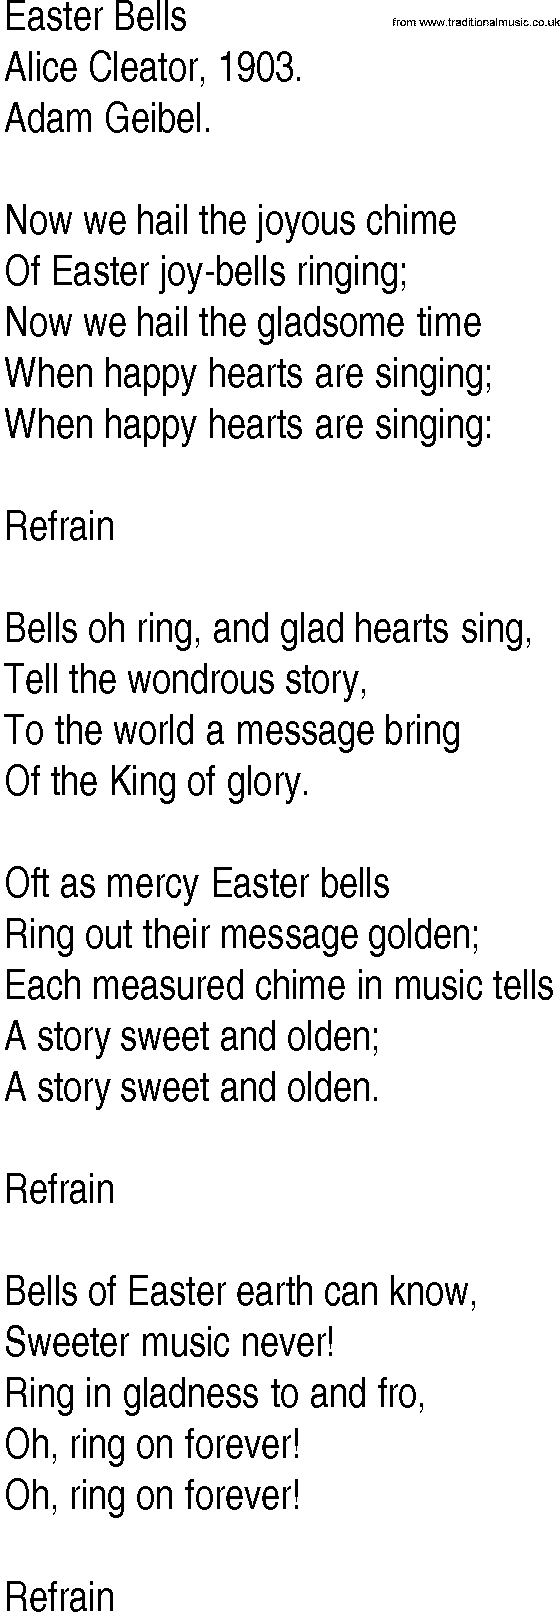 Hymn and Gospel Song: Easter Bells by Alice Cleator lyrics